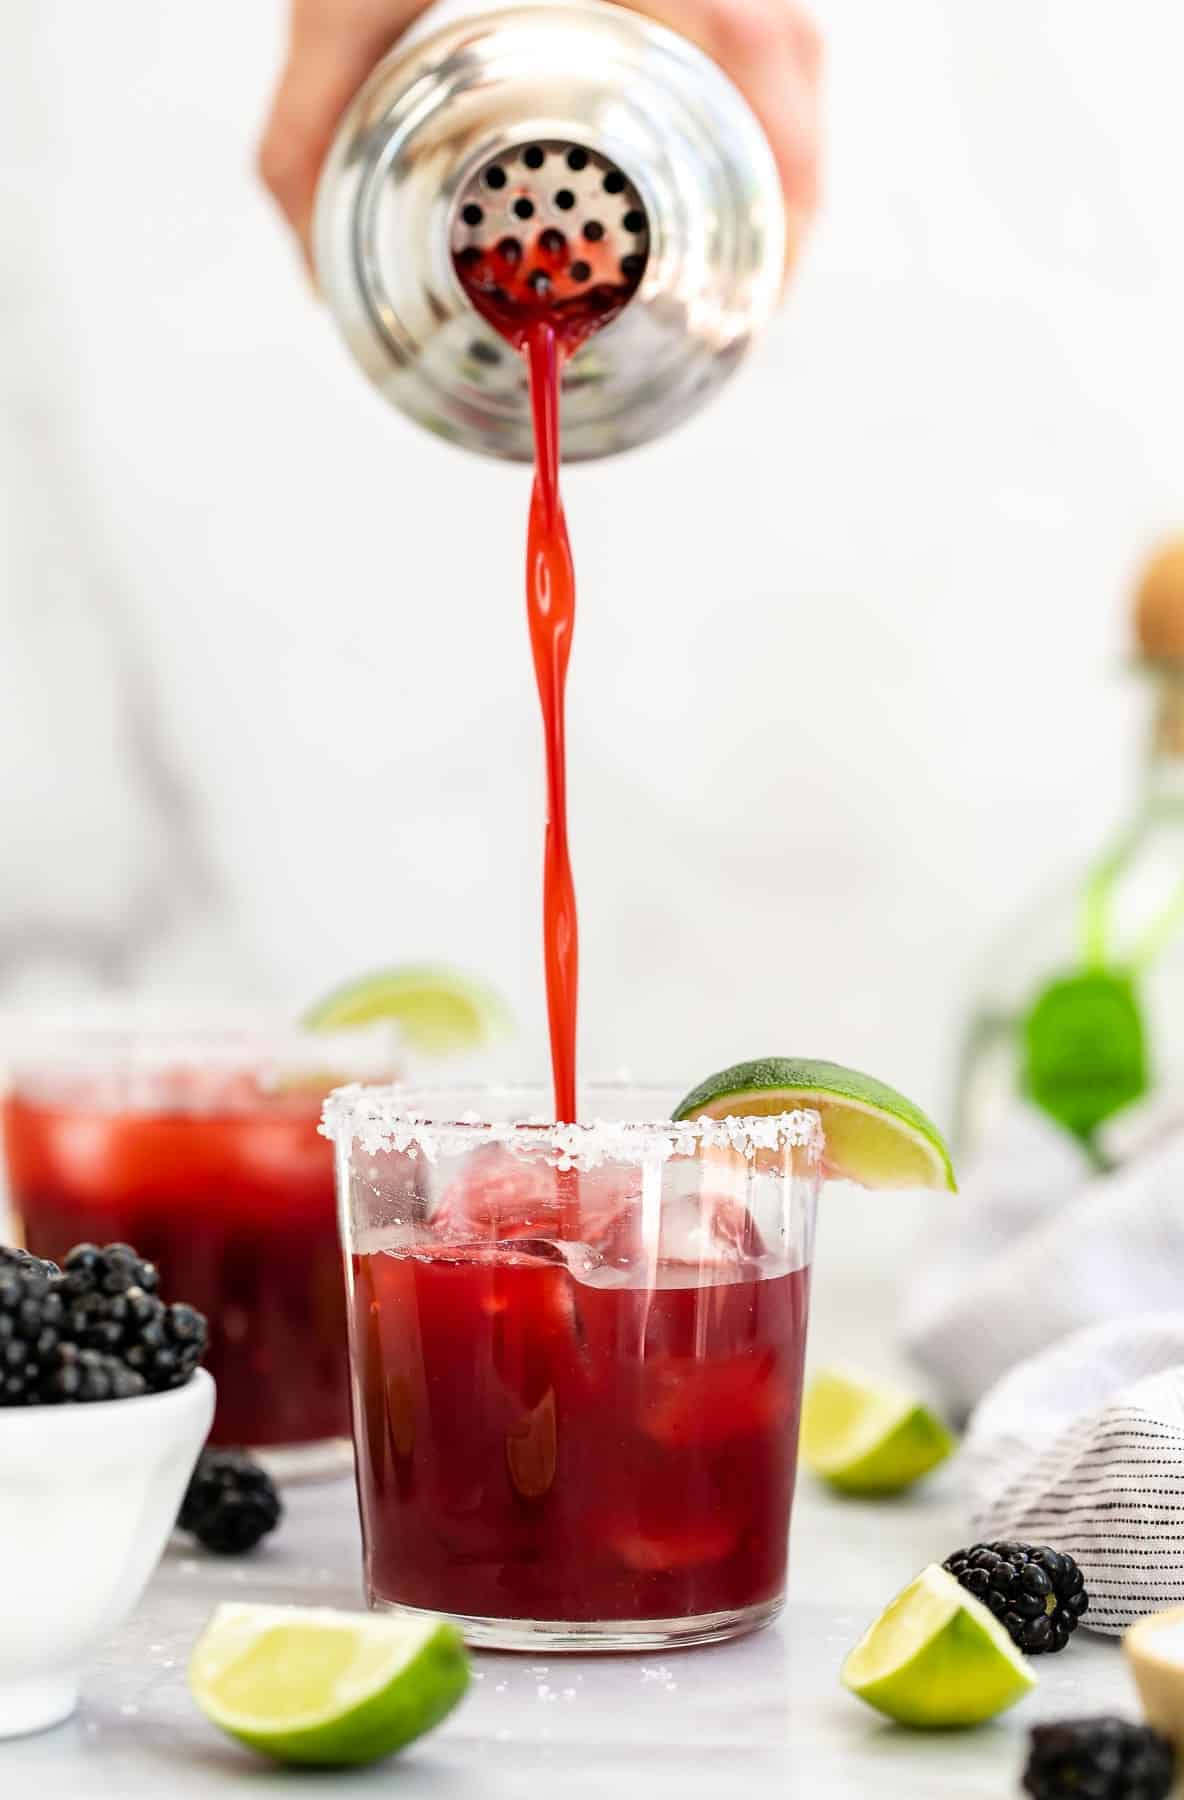 Pouring the blackberry margarita over ice in a glass.